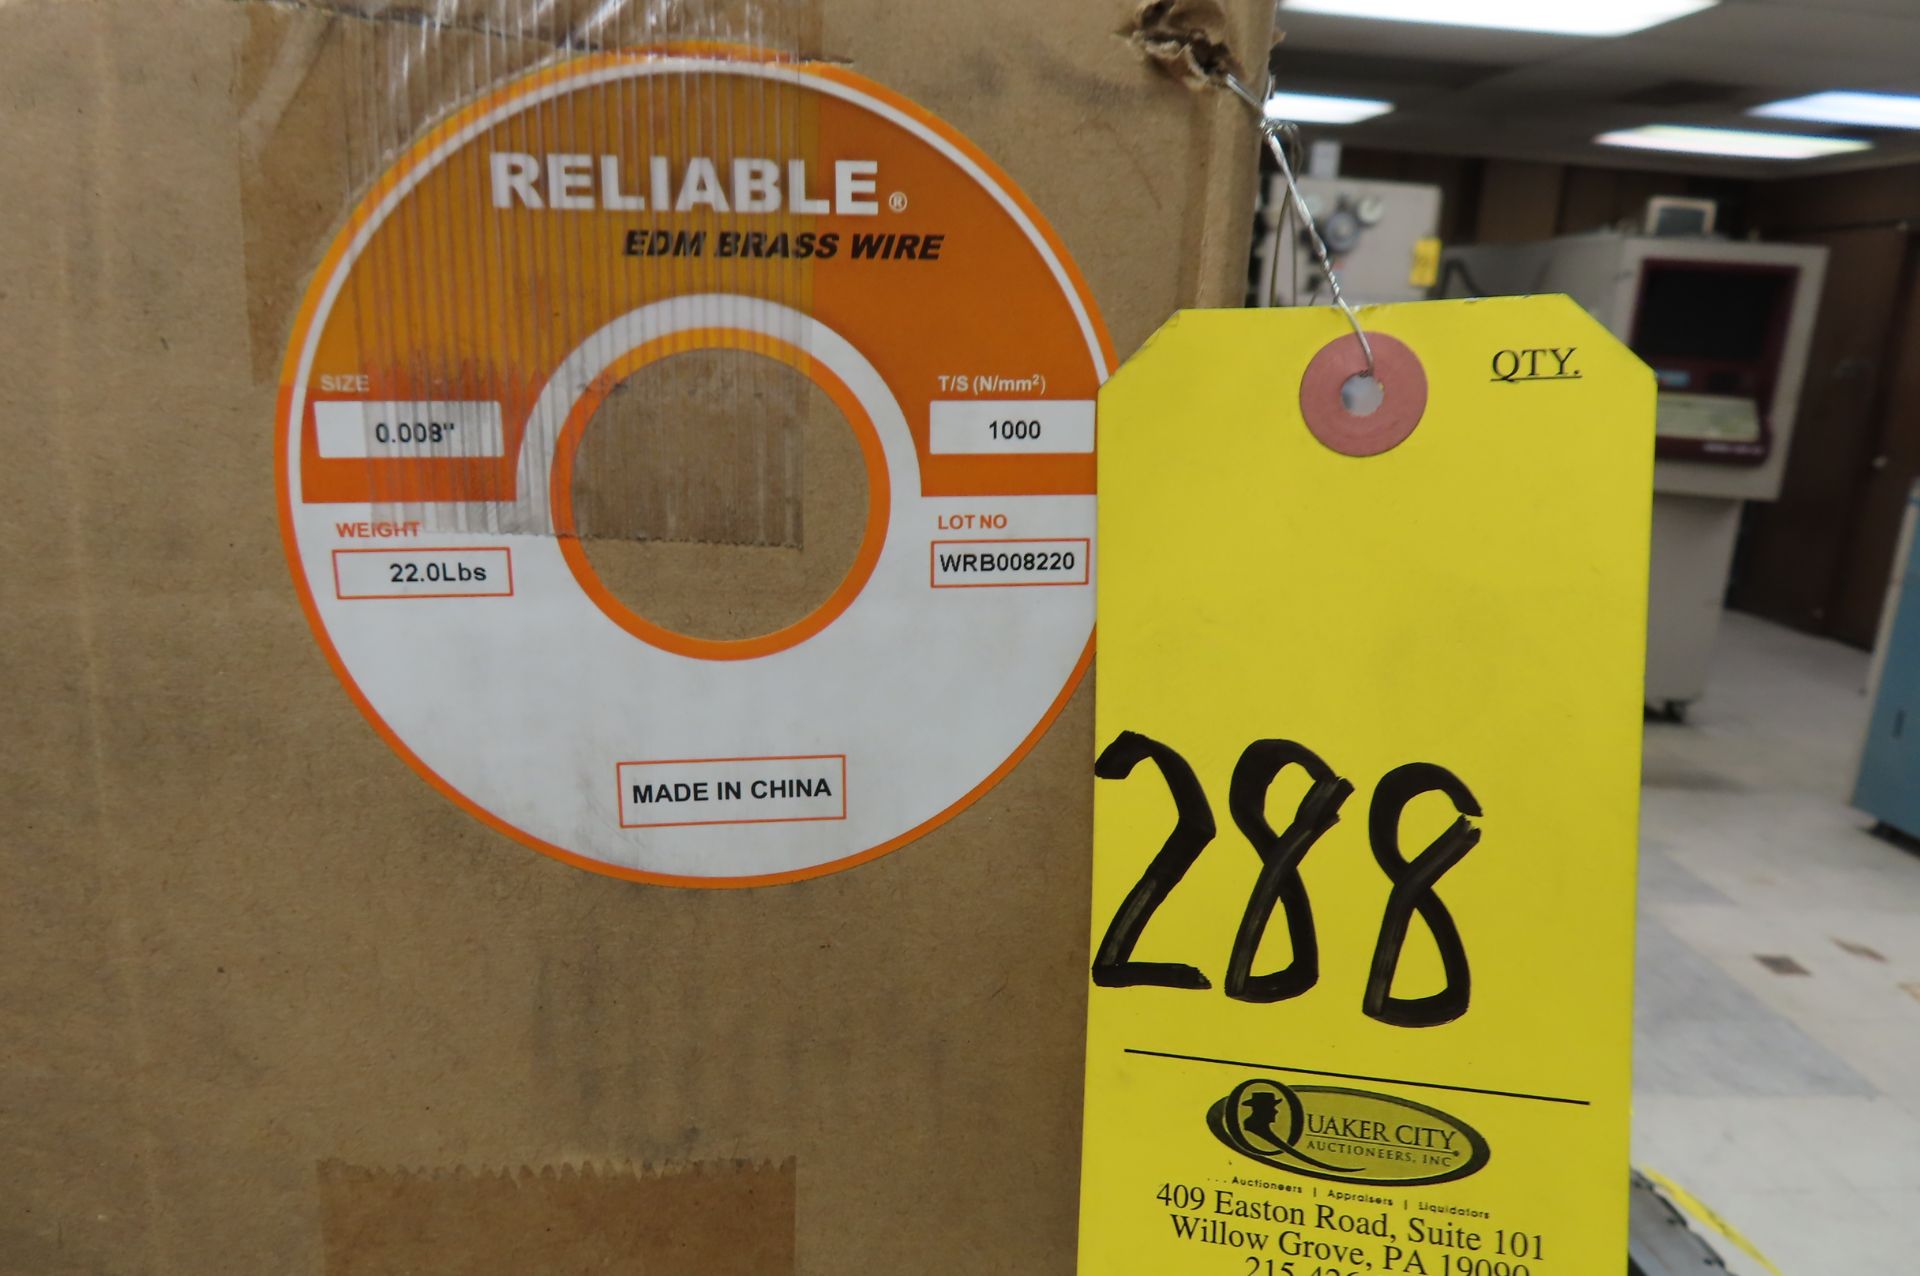 (6) RELIABLE EDM BRASS WIRE REELS, .008 IN. - Image 2 of 2